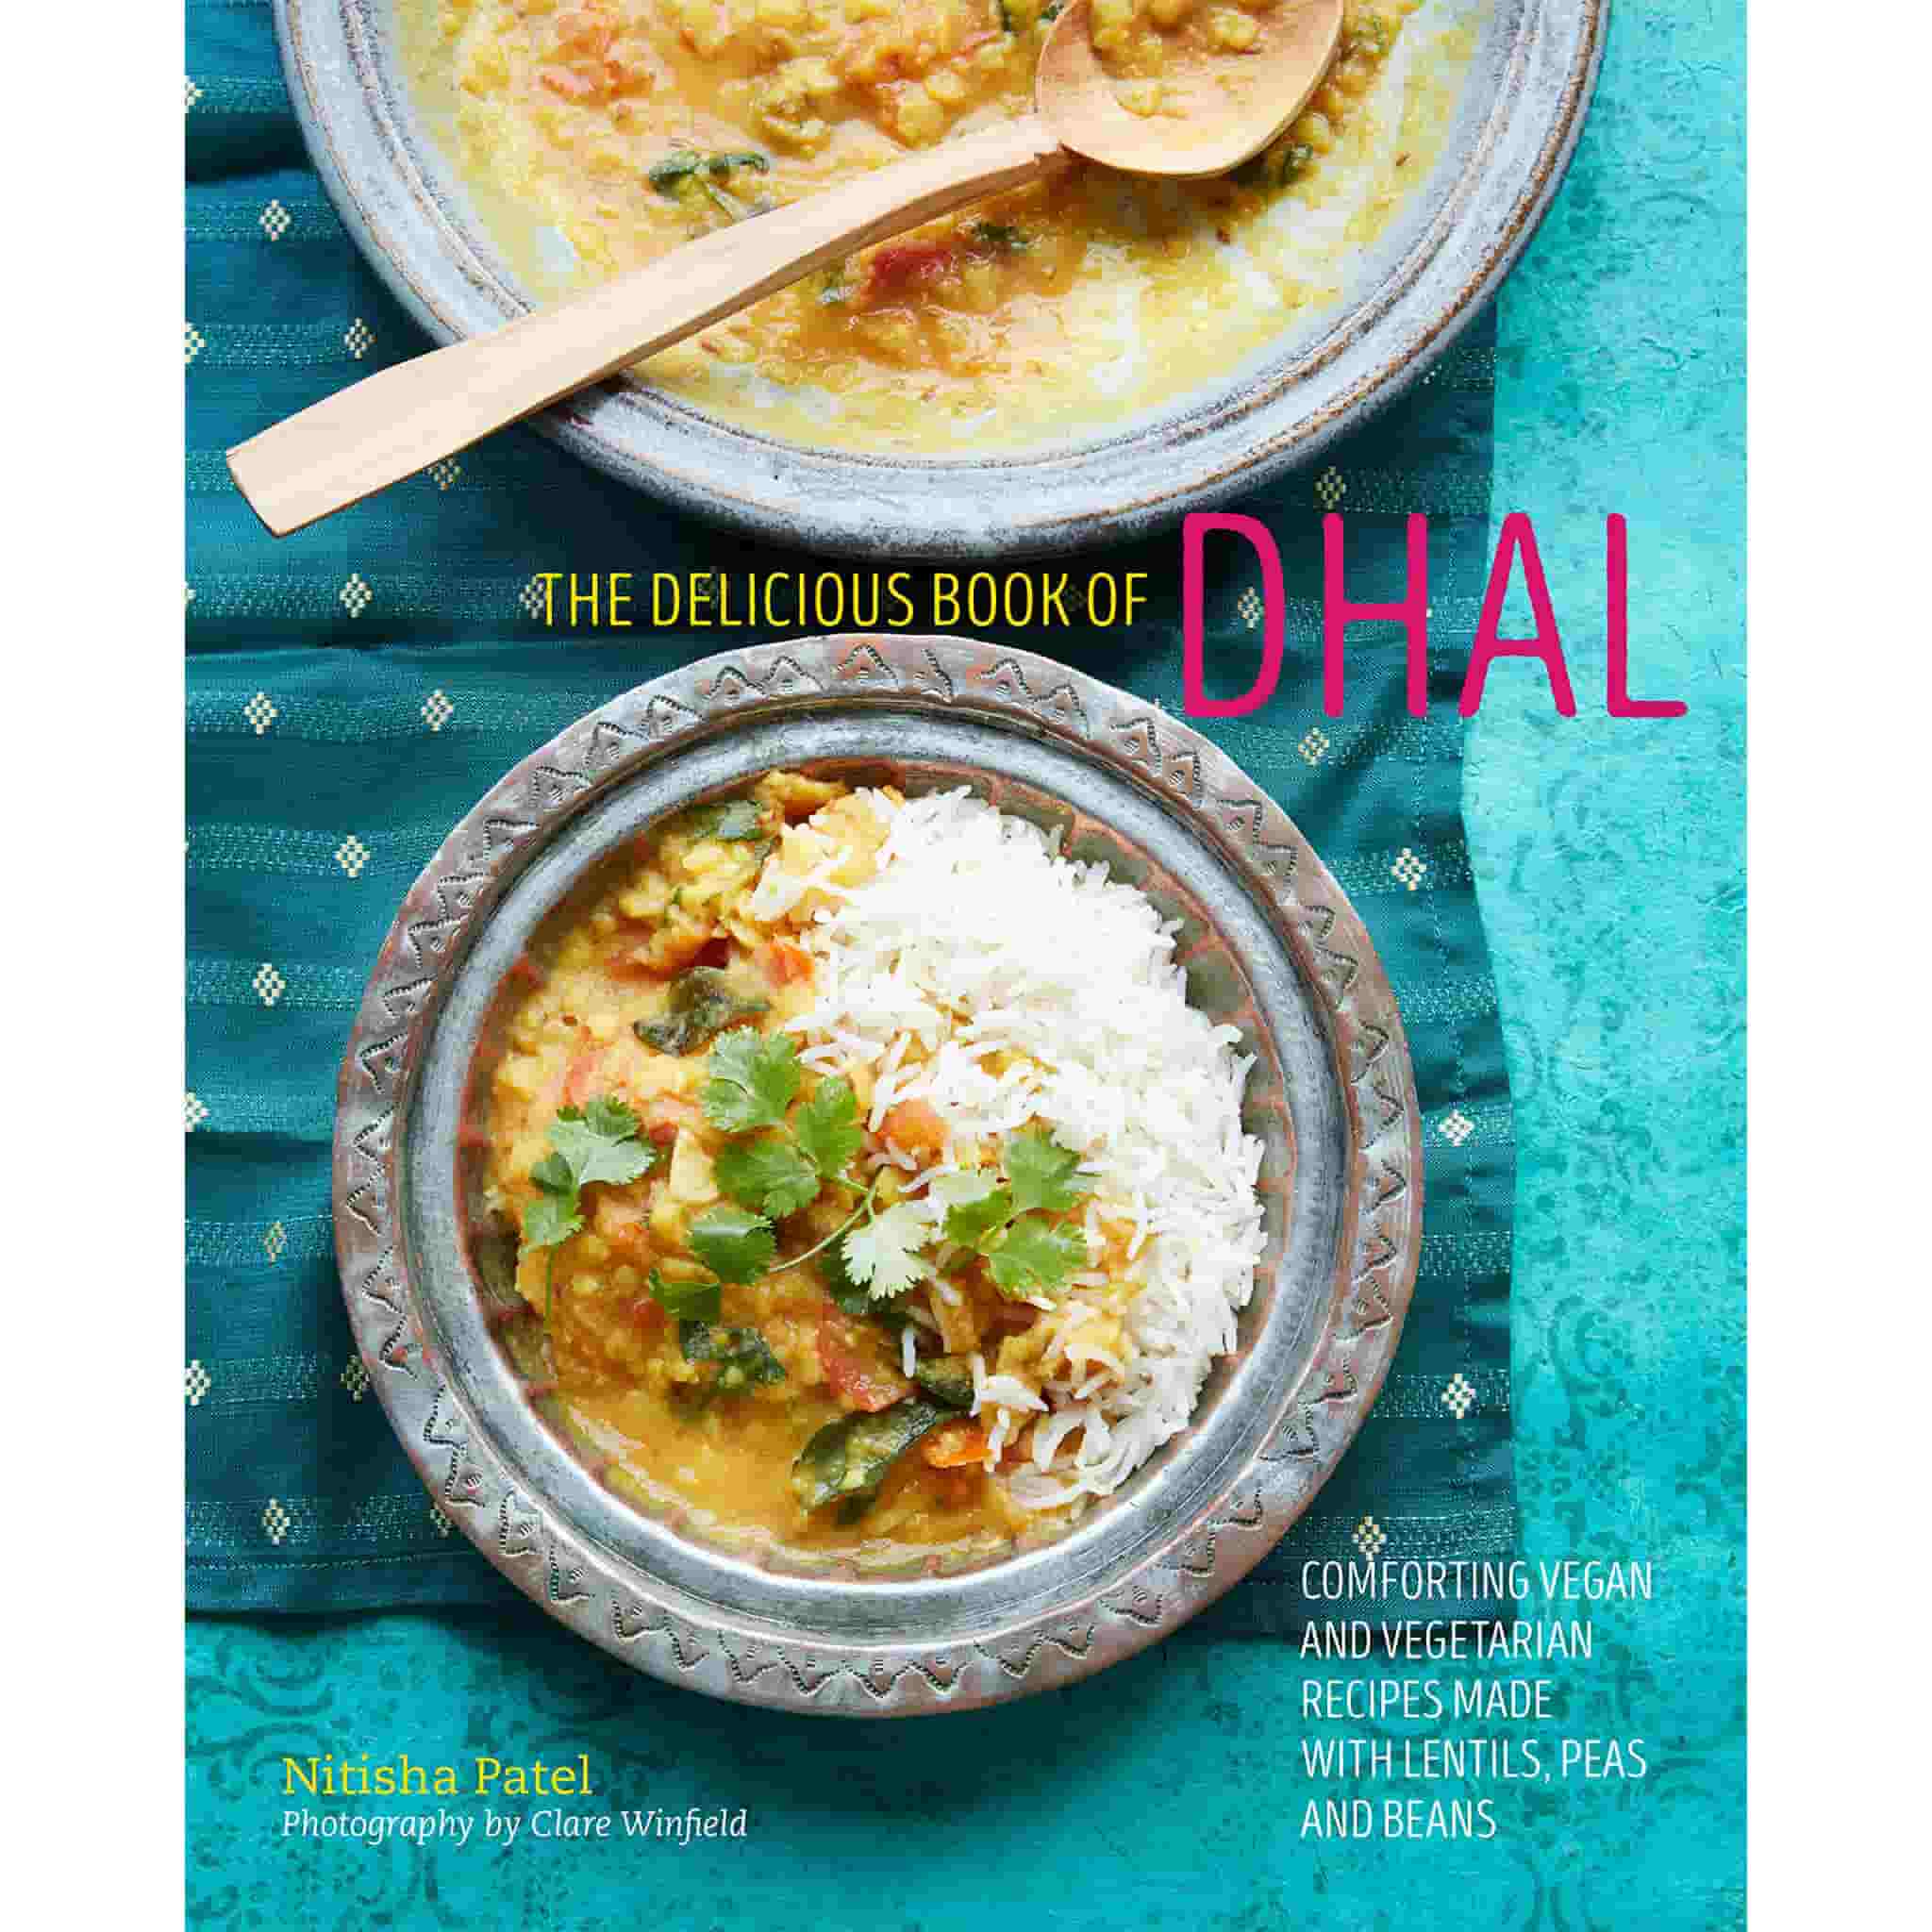 The Delicious Book of Dhal by Nitisha Patel